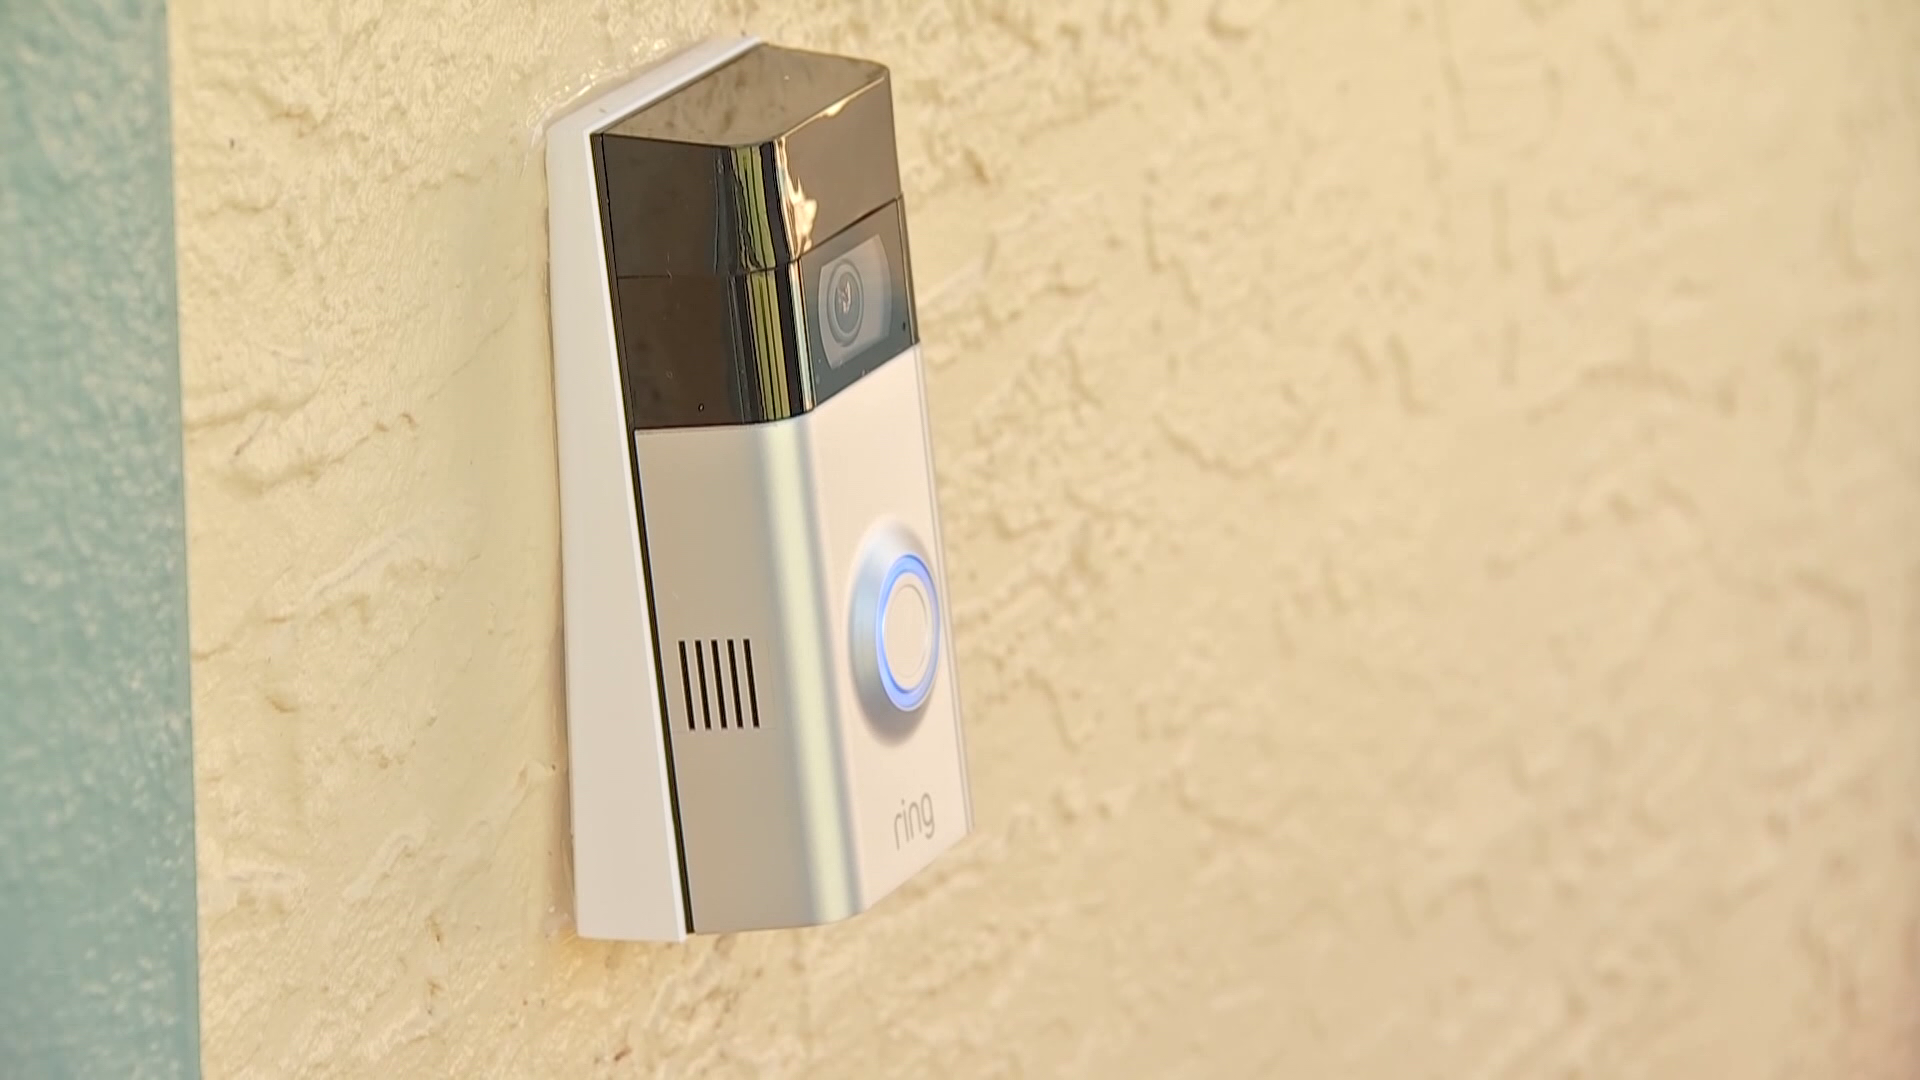 Amazon Alters Regulations for Accessing Ring Doorbell Footage